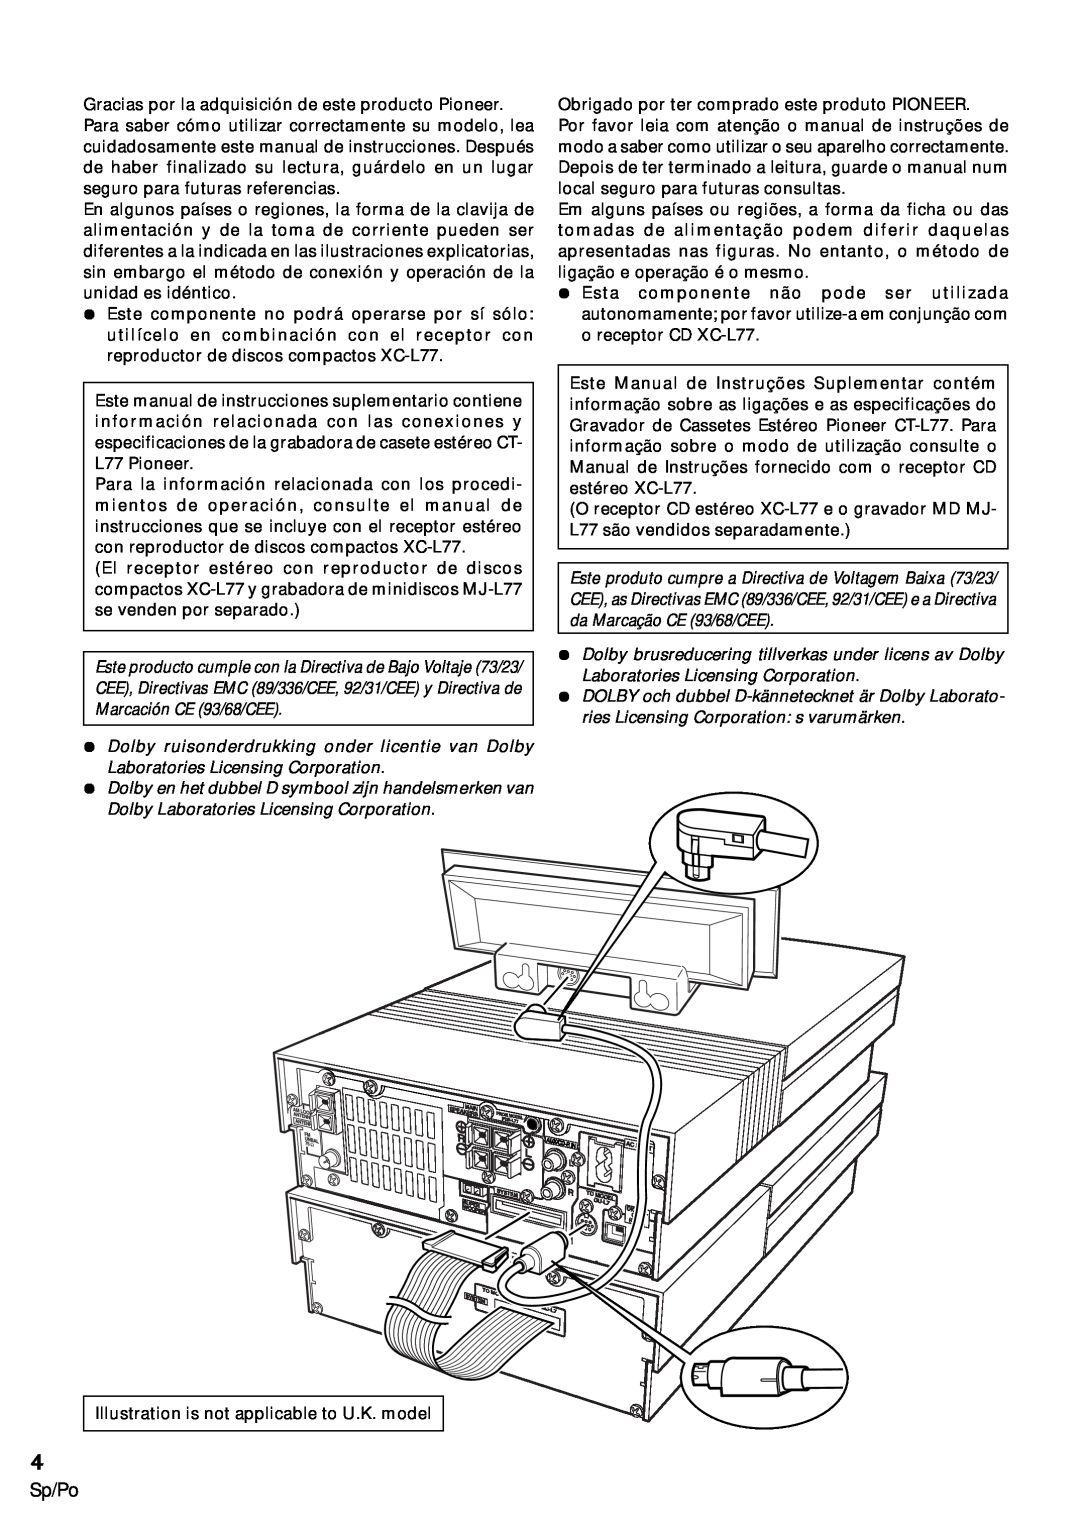 Pioneer CT-L77 operating instructions Sp/Po 